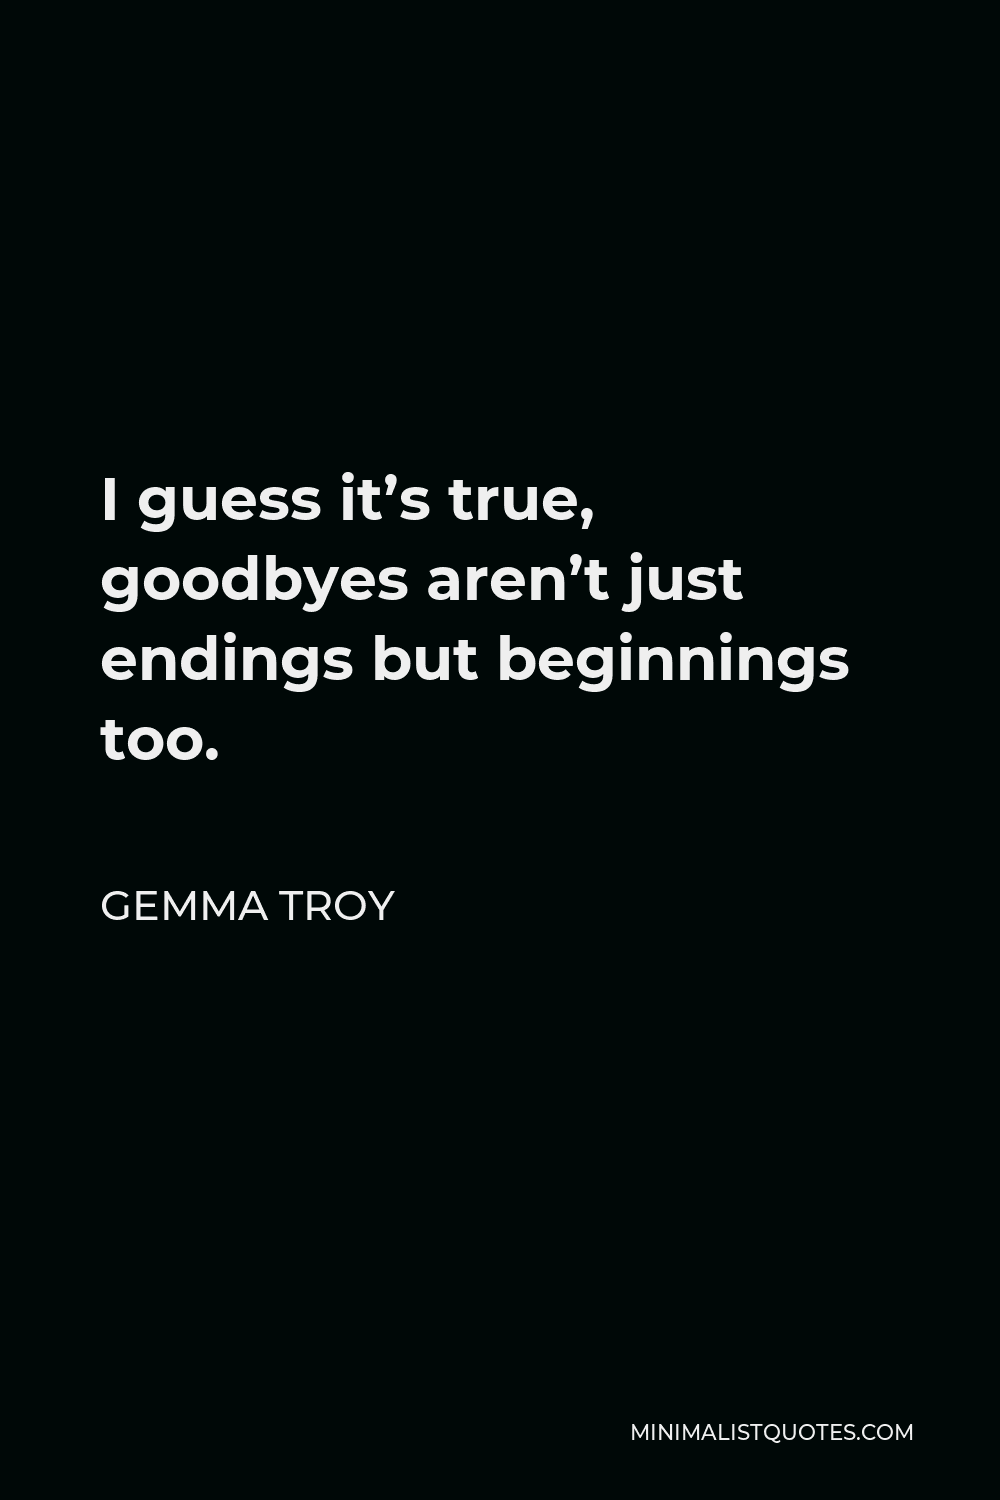 Gemma Troy Quote - I guess it’s true, goodbyes aren’t just endings but beginnings too.